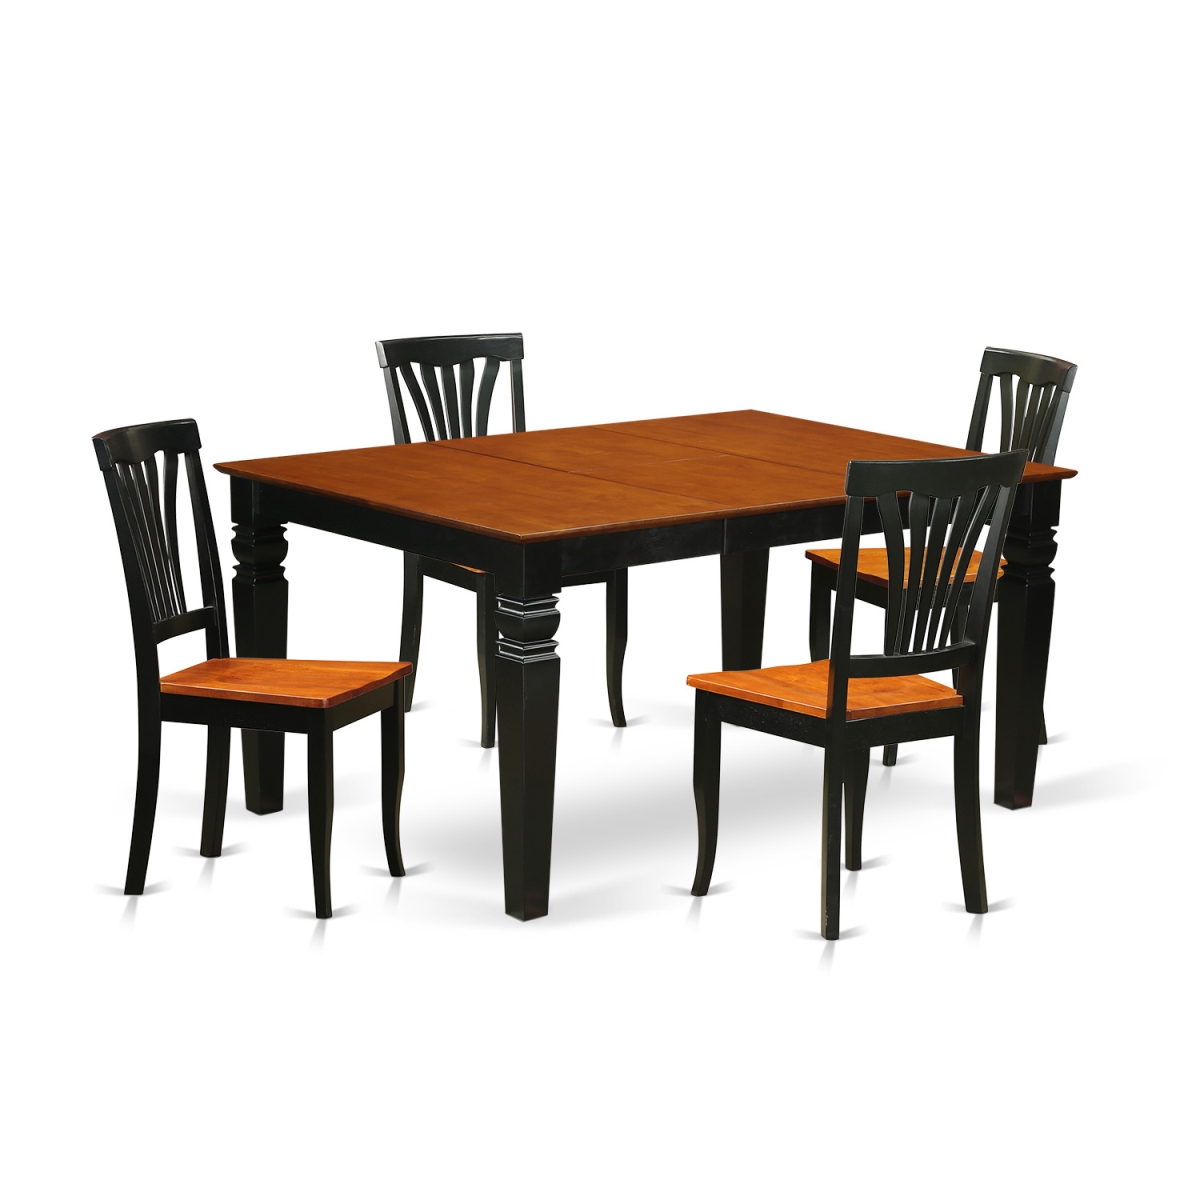 Dinette Set With One Weston Table & 6 Wood Chairs, Rich Black - 7 Piece